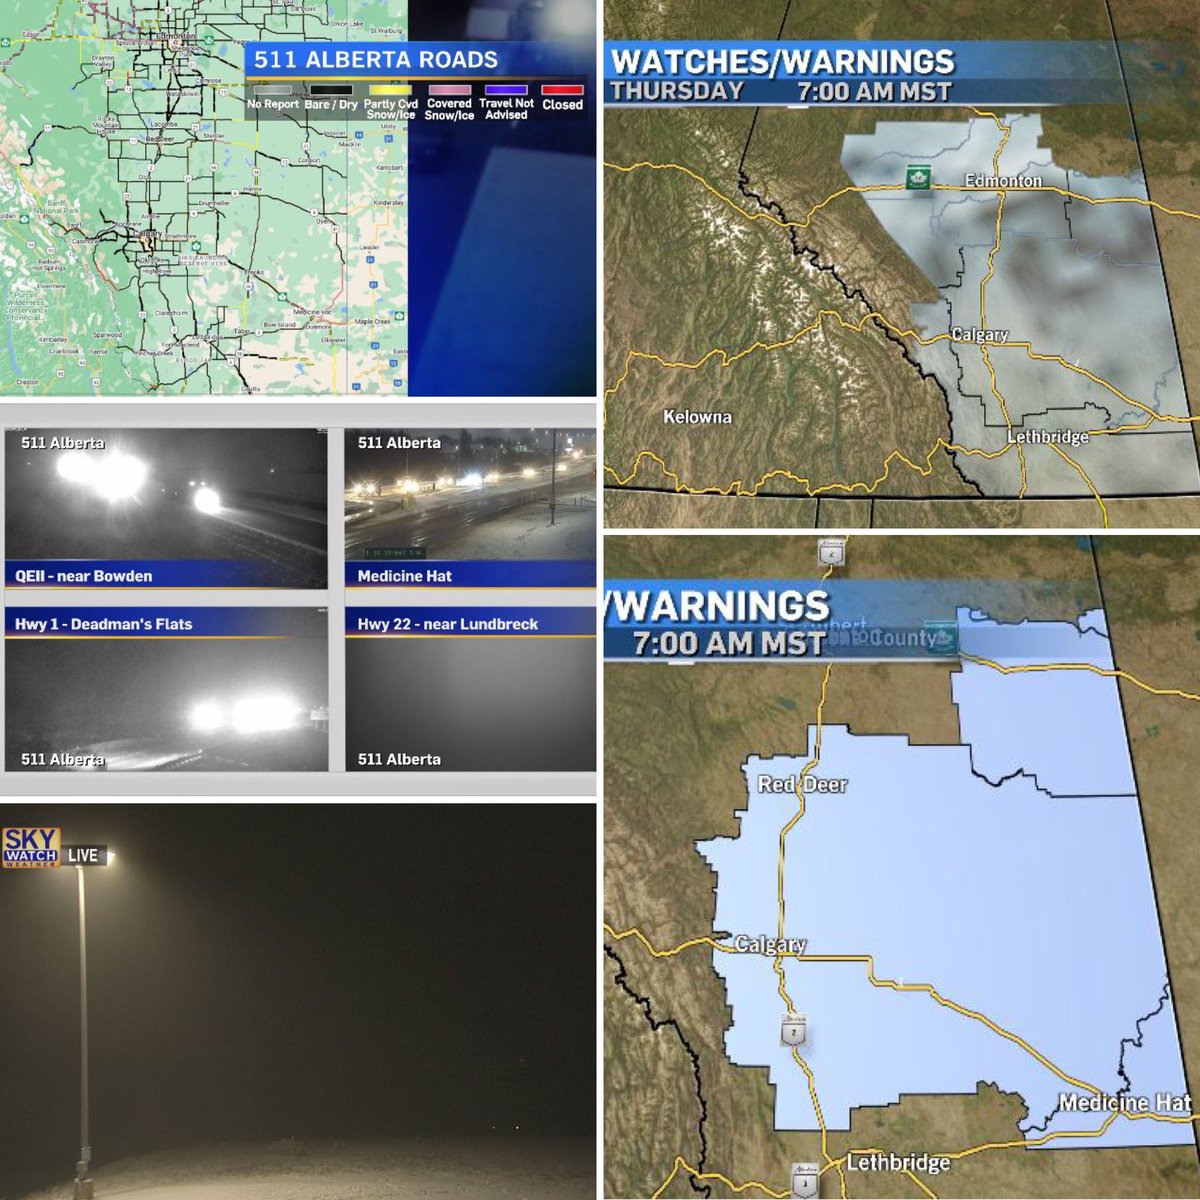 Expect limited visibility this morning in Calgary and S.AB. Fog Advisories extend N. of #YEG (top right), a Freezing Drizzle Advisory incl. #YYC & areas N, S, and E. Traffic & weather updates on @CTVMorningYYC w/ me and @ctv_michelle.